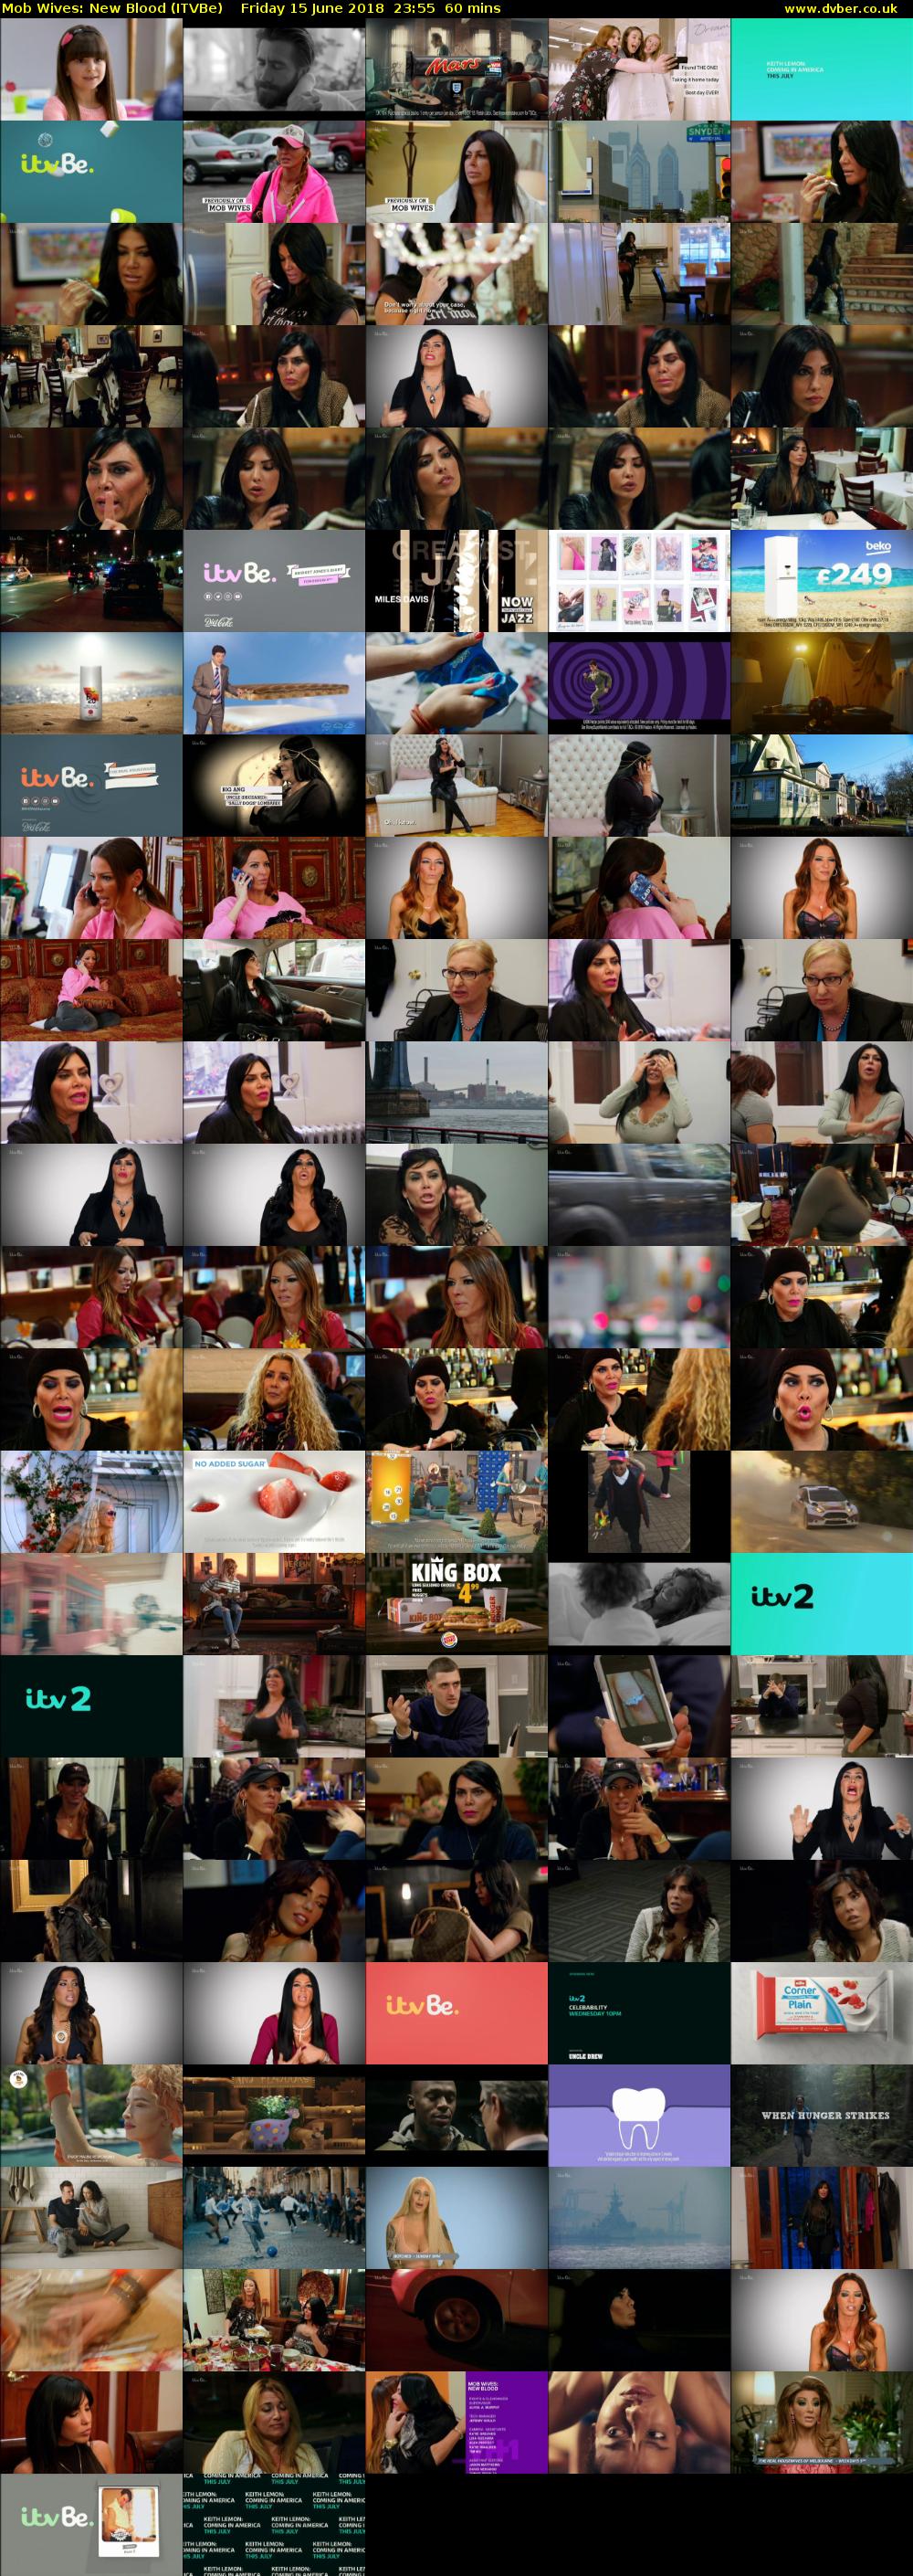 Mob Wives: New Blood (ITVBe) Friday 15 June 2018 23:55 - 00:55